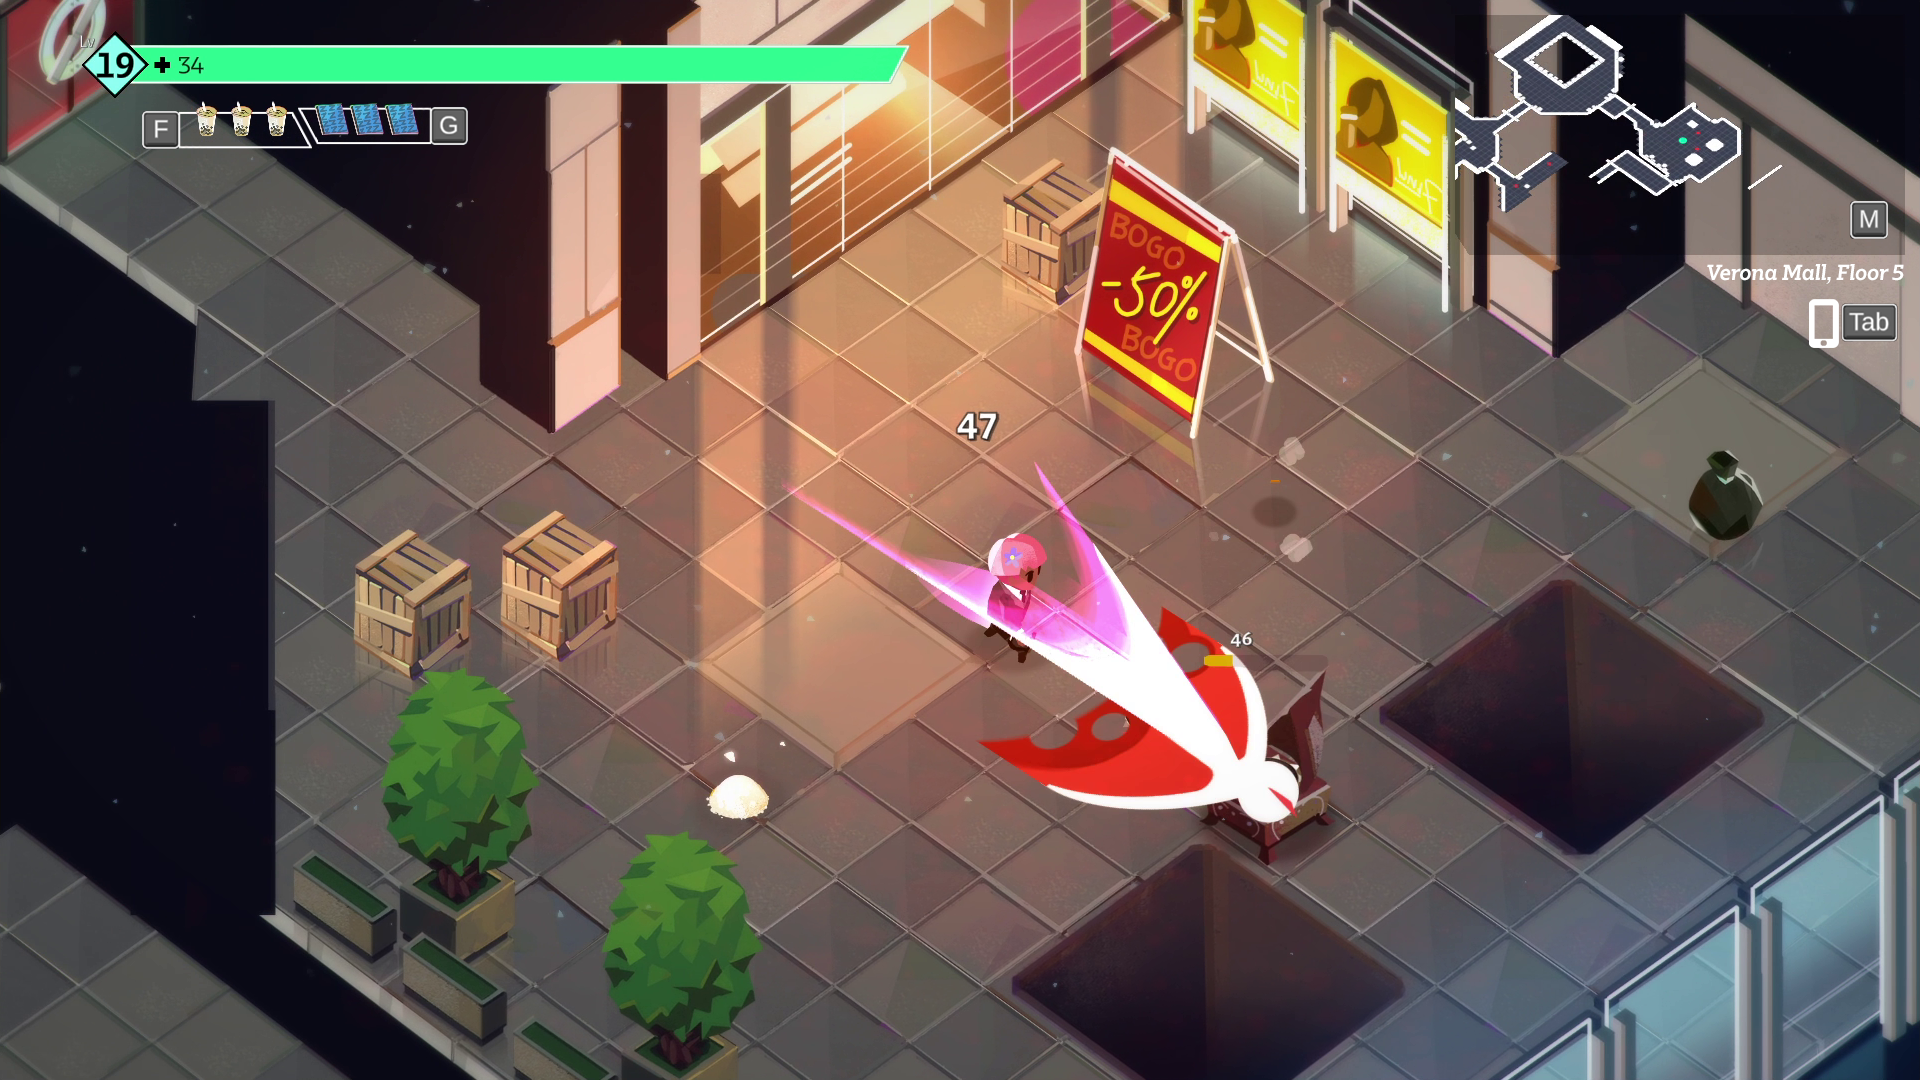 A screenshot of combat from Boyfriend Dungeon on a level of the mall. There's a 50% off sale sign